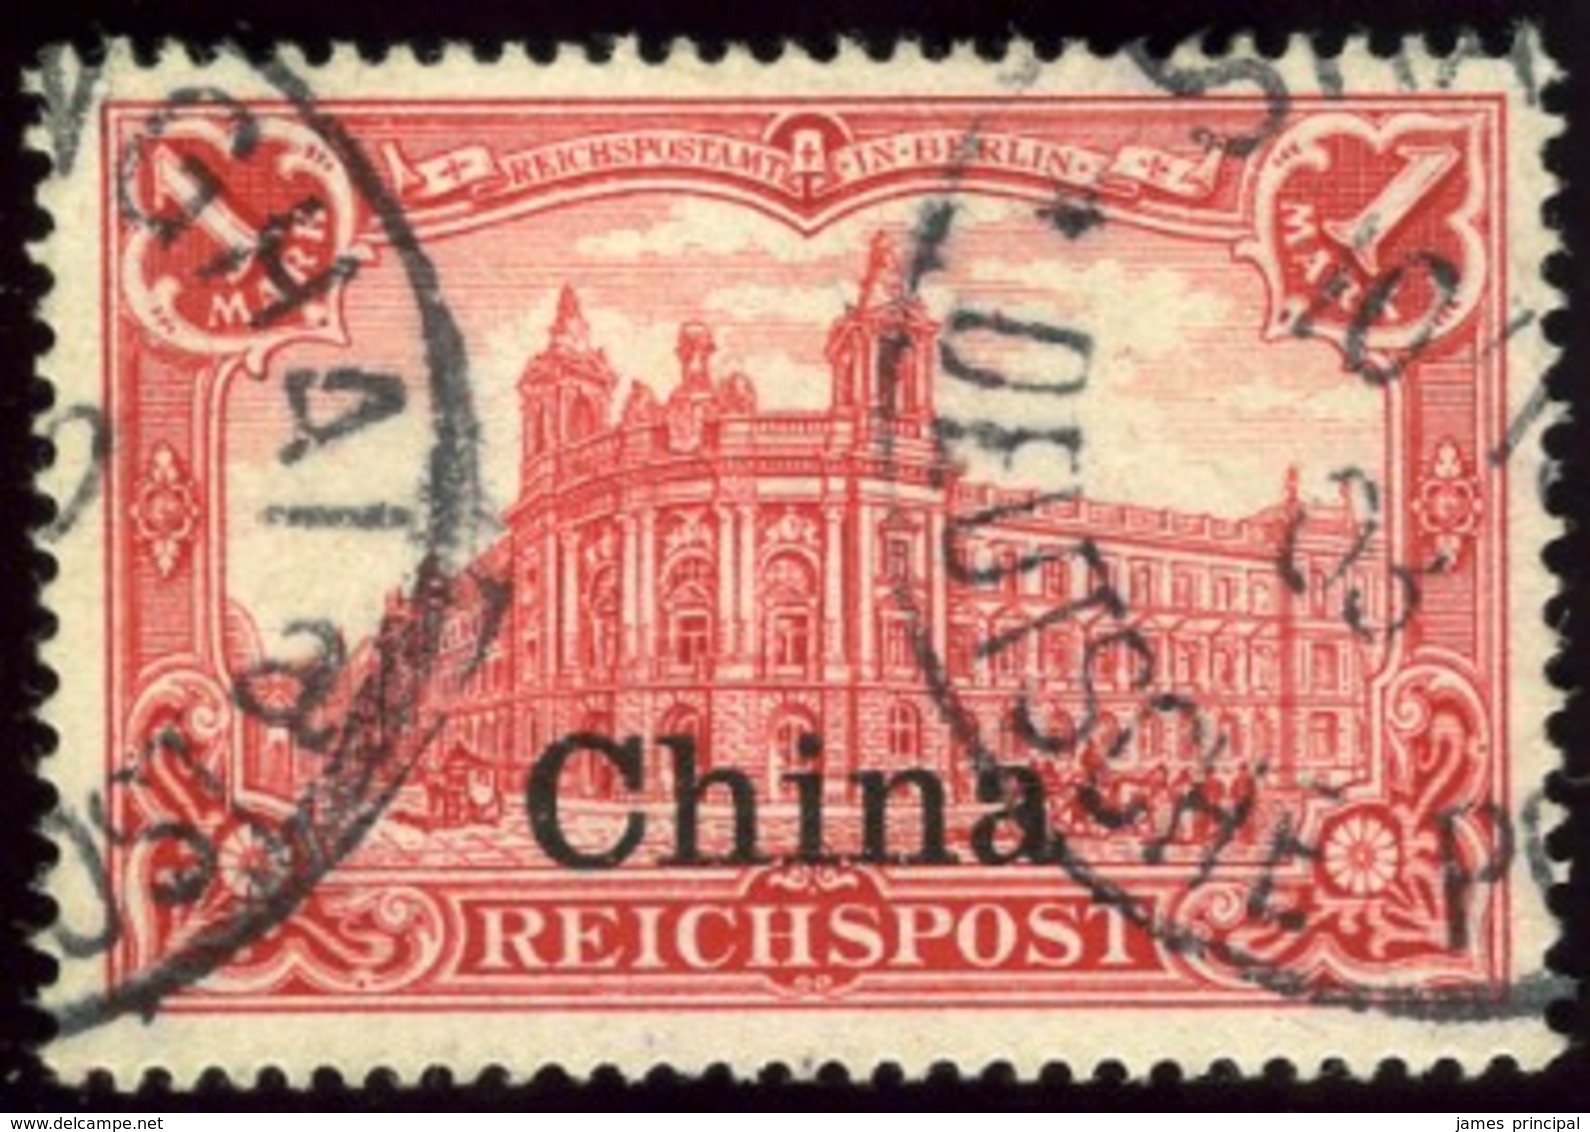 German Post Offices In China. Sc #33. Used. VF. - China (offices)